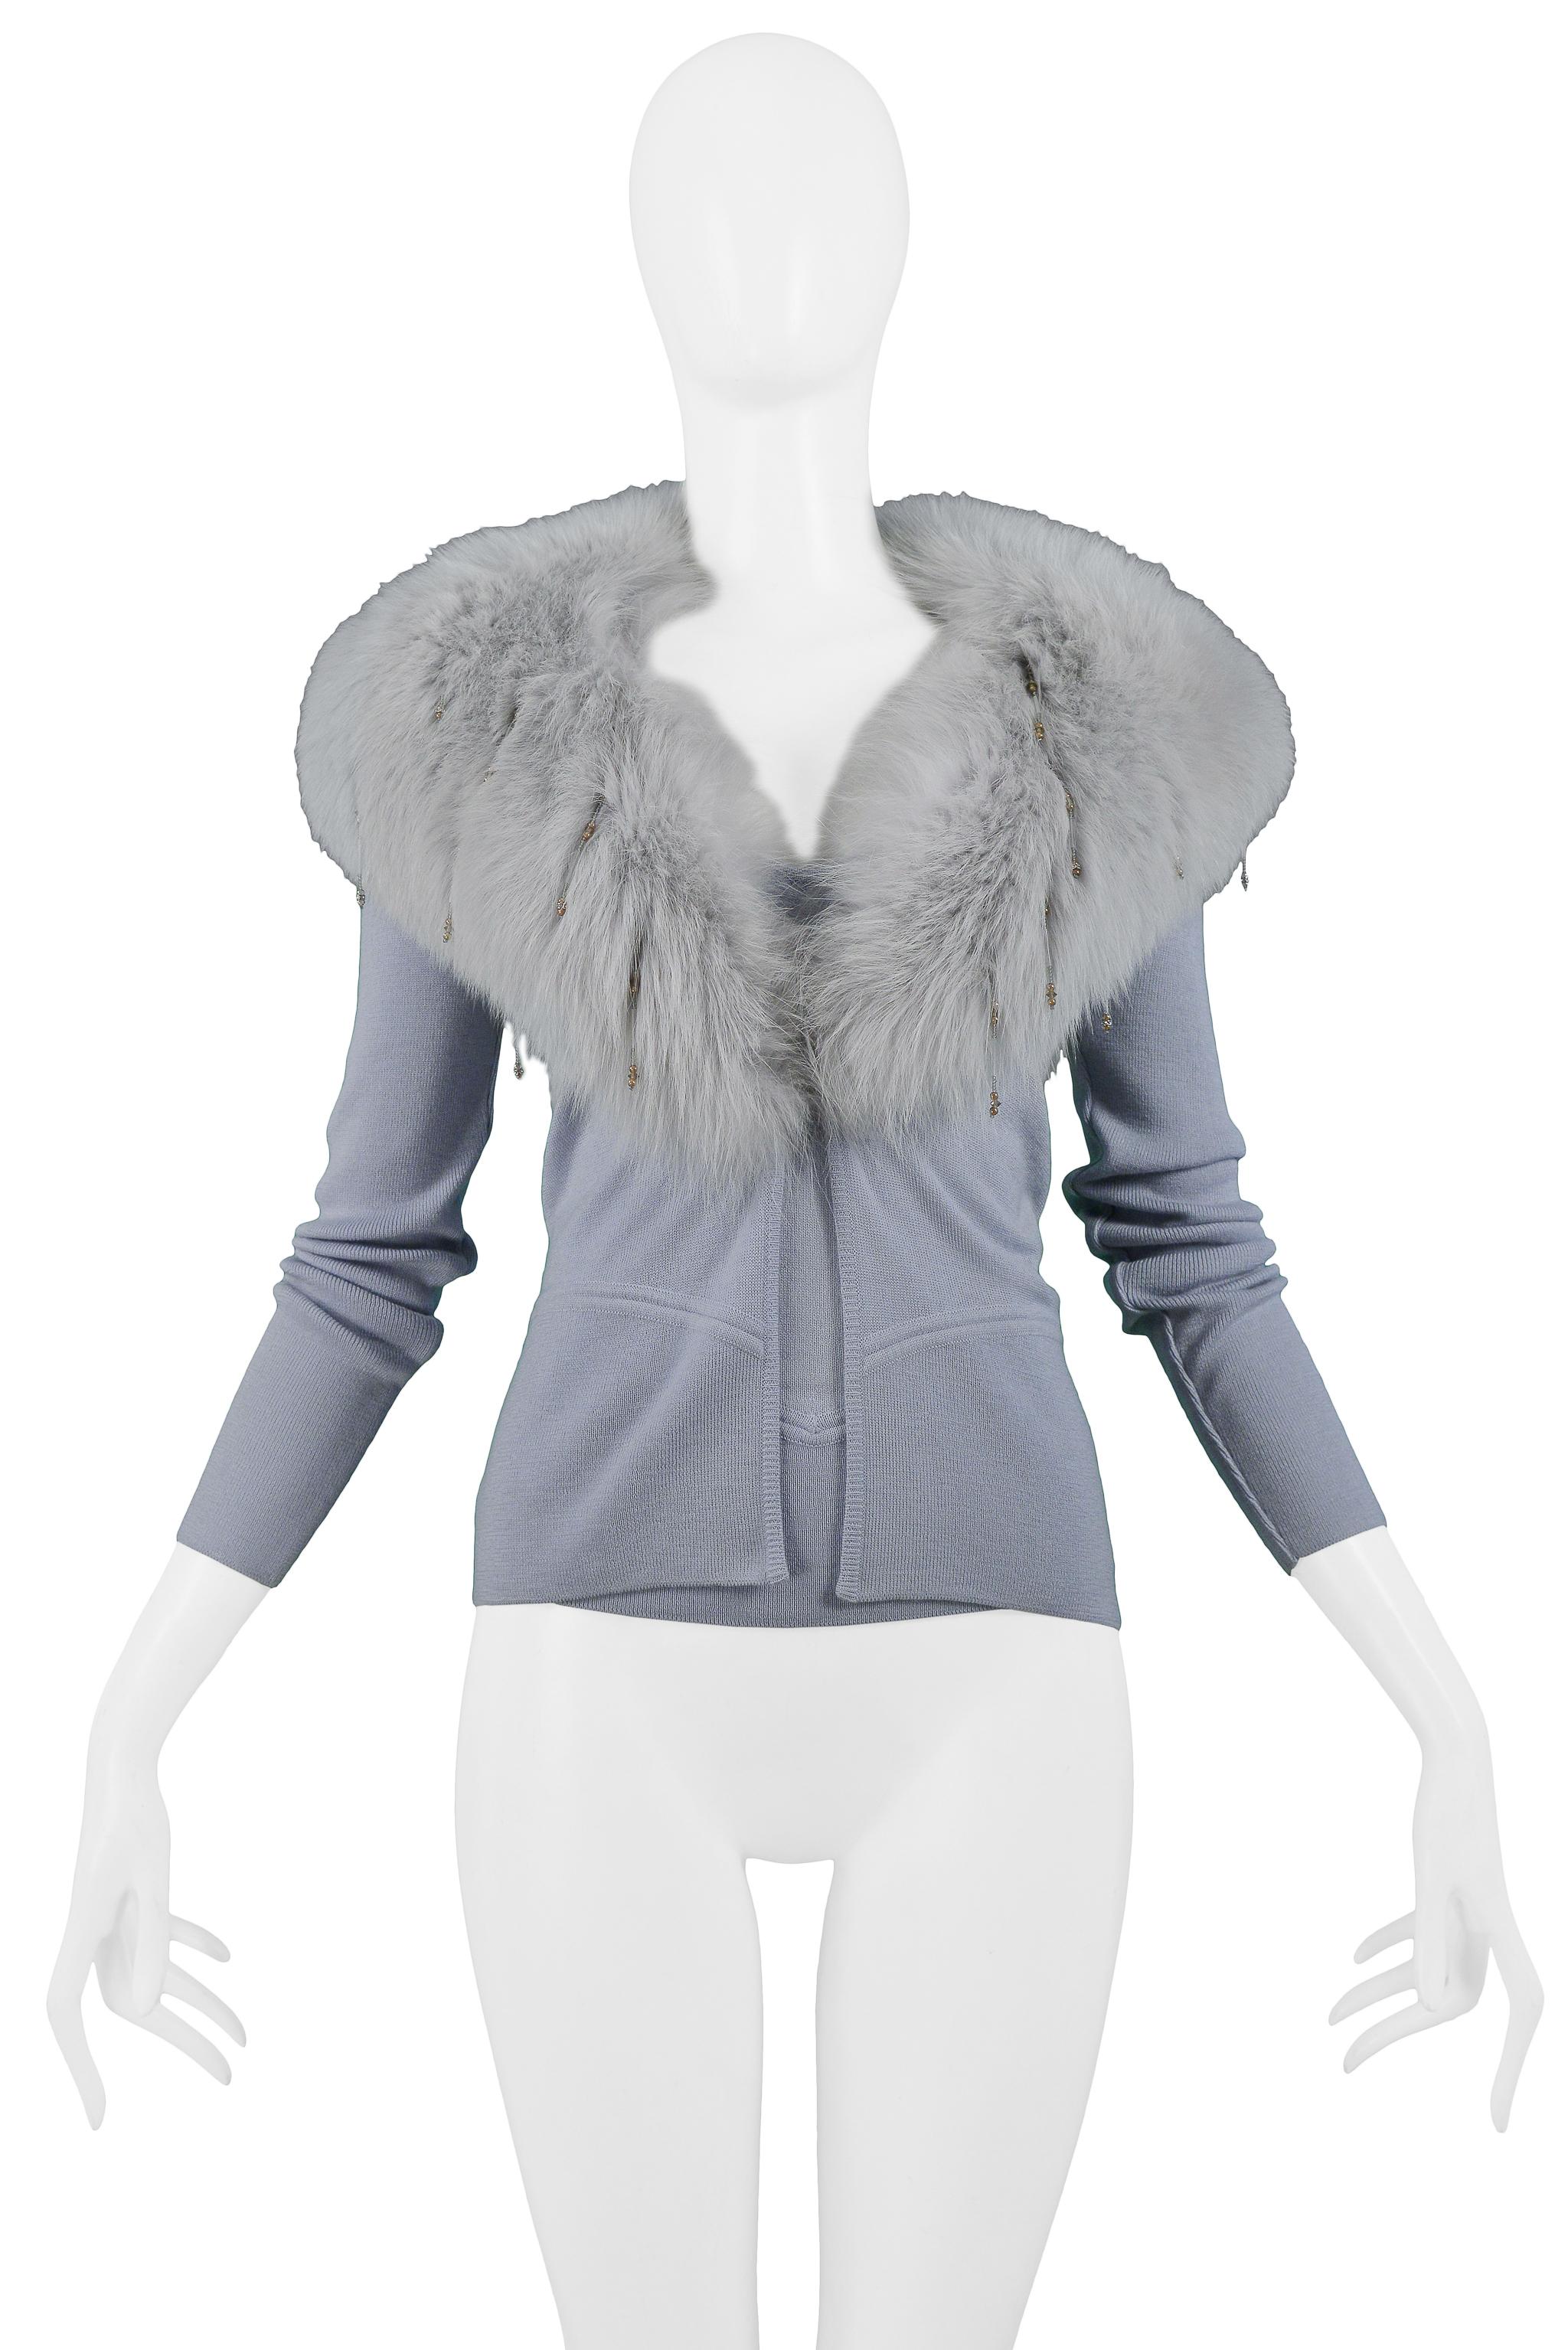 Vintage Gianni Versace powder blue knit cardigan with a fox fur collar that features beaded accents, and a matching knit camisole with ribbed bustline and waistline.

Excellent Vintage Condition.

Both Pieces Size 40